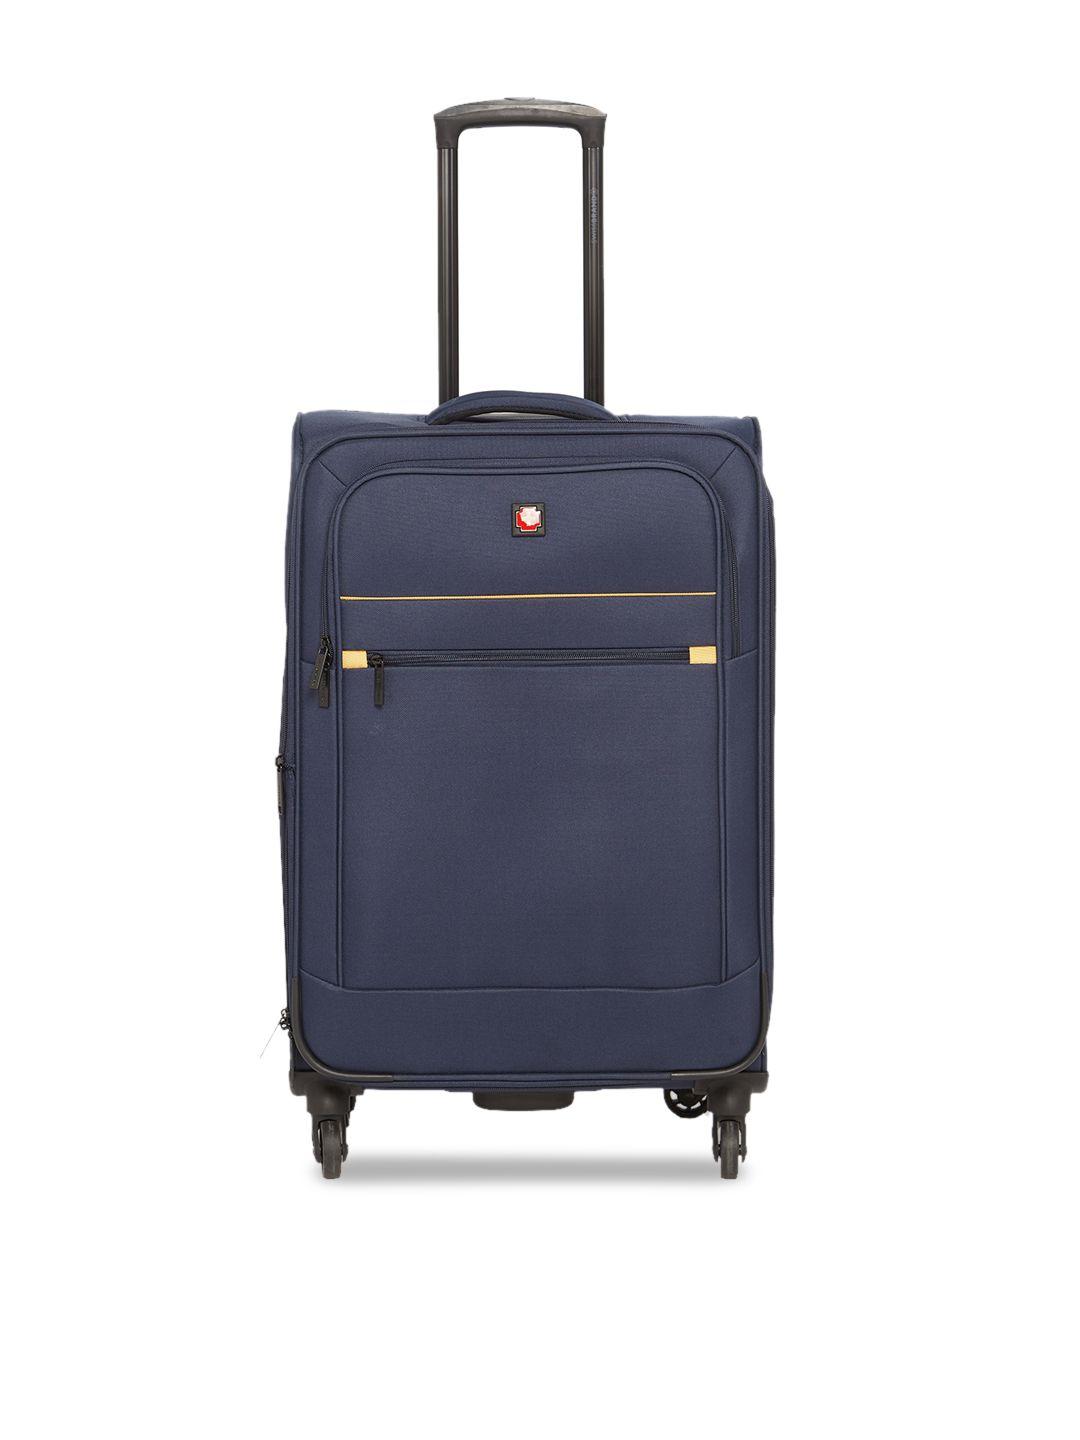 swiss brand navy blue solid barcelona 360-degree rotation soft-sided medium trolley suitcase